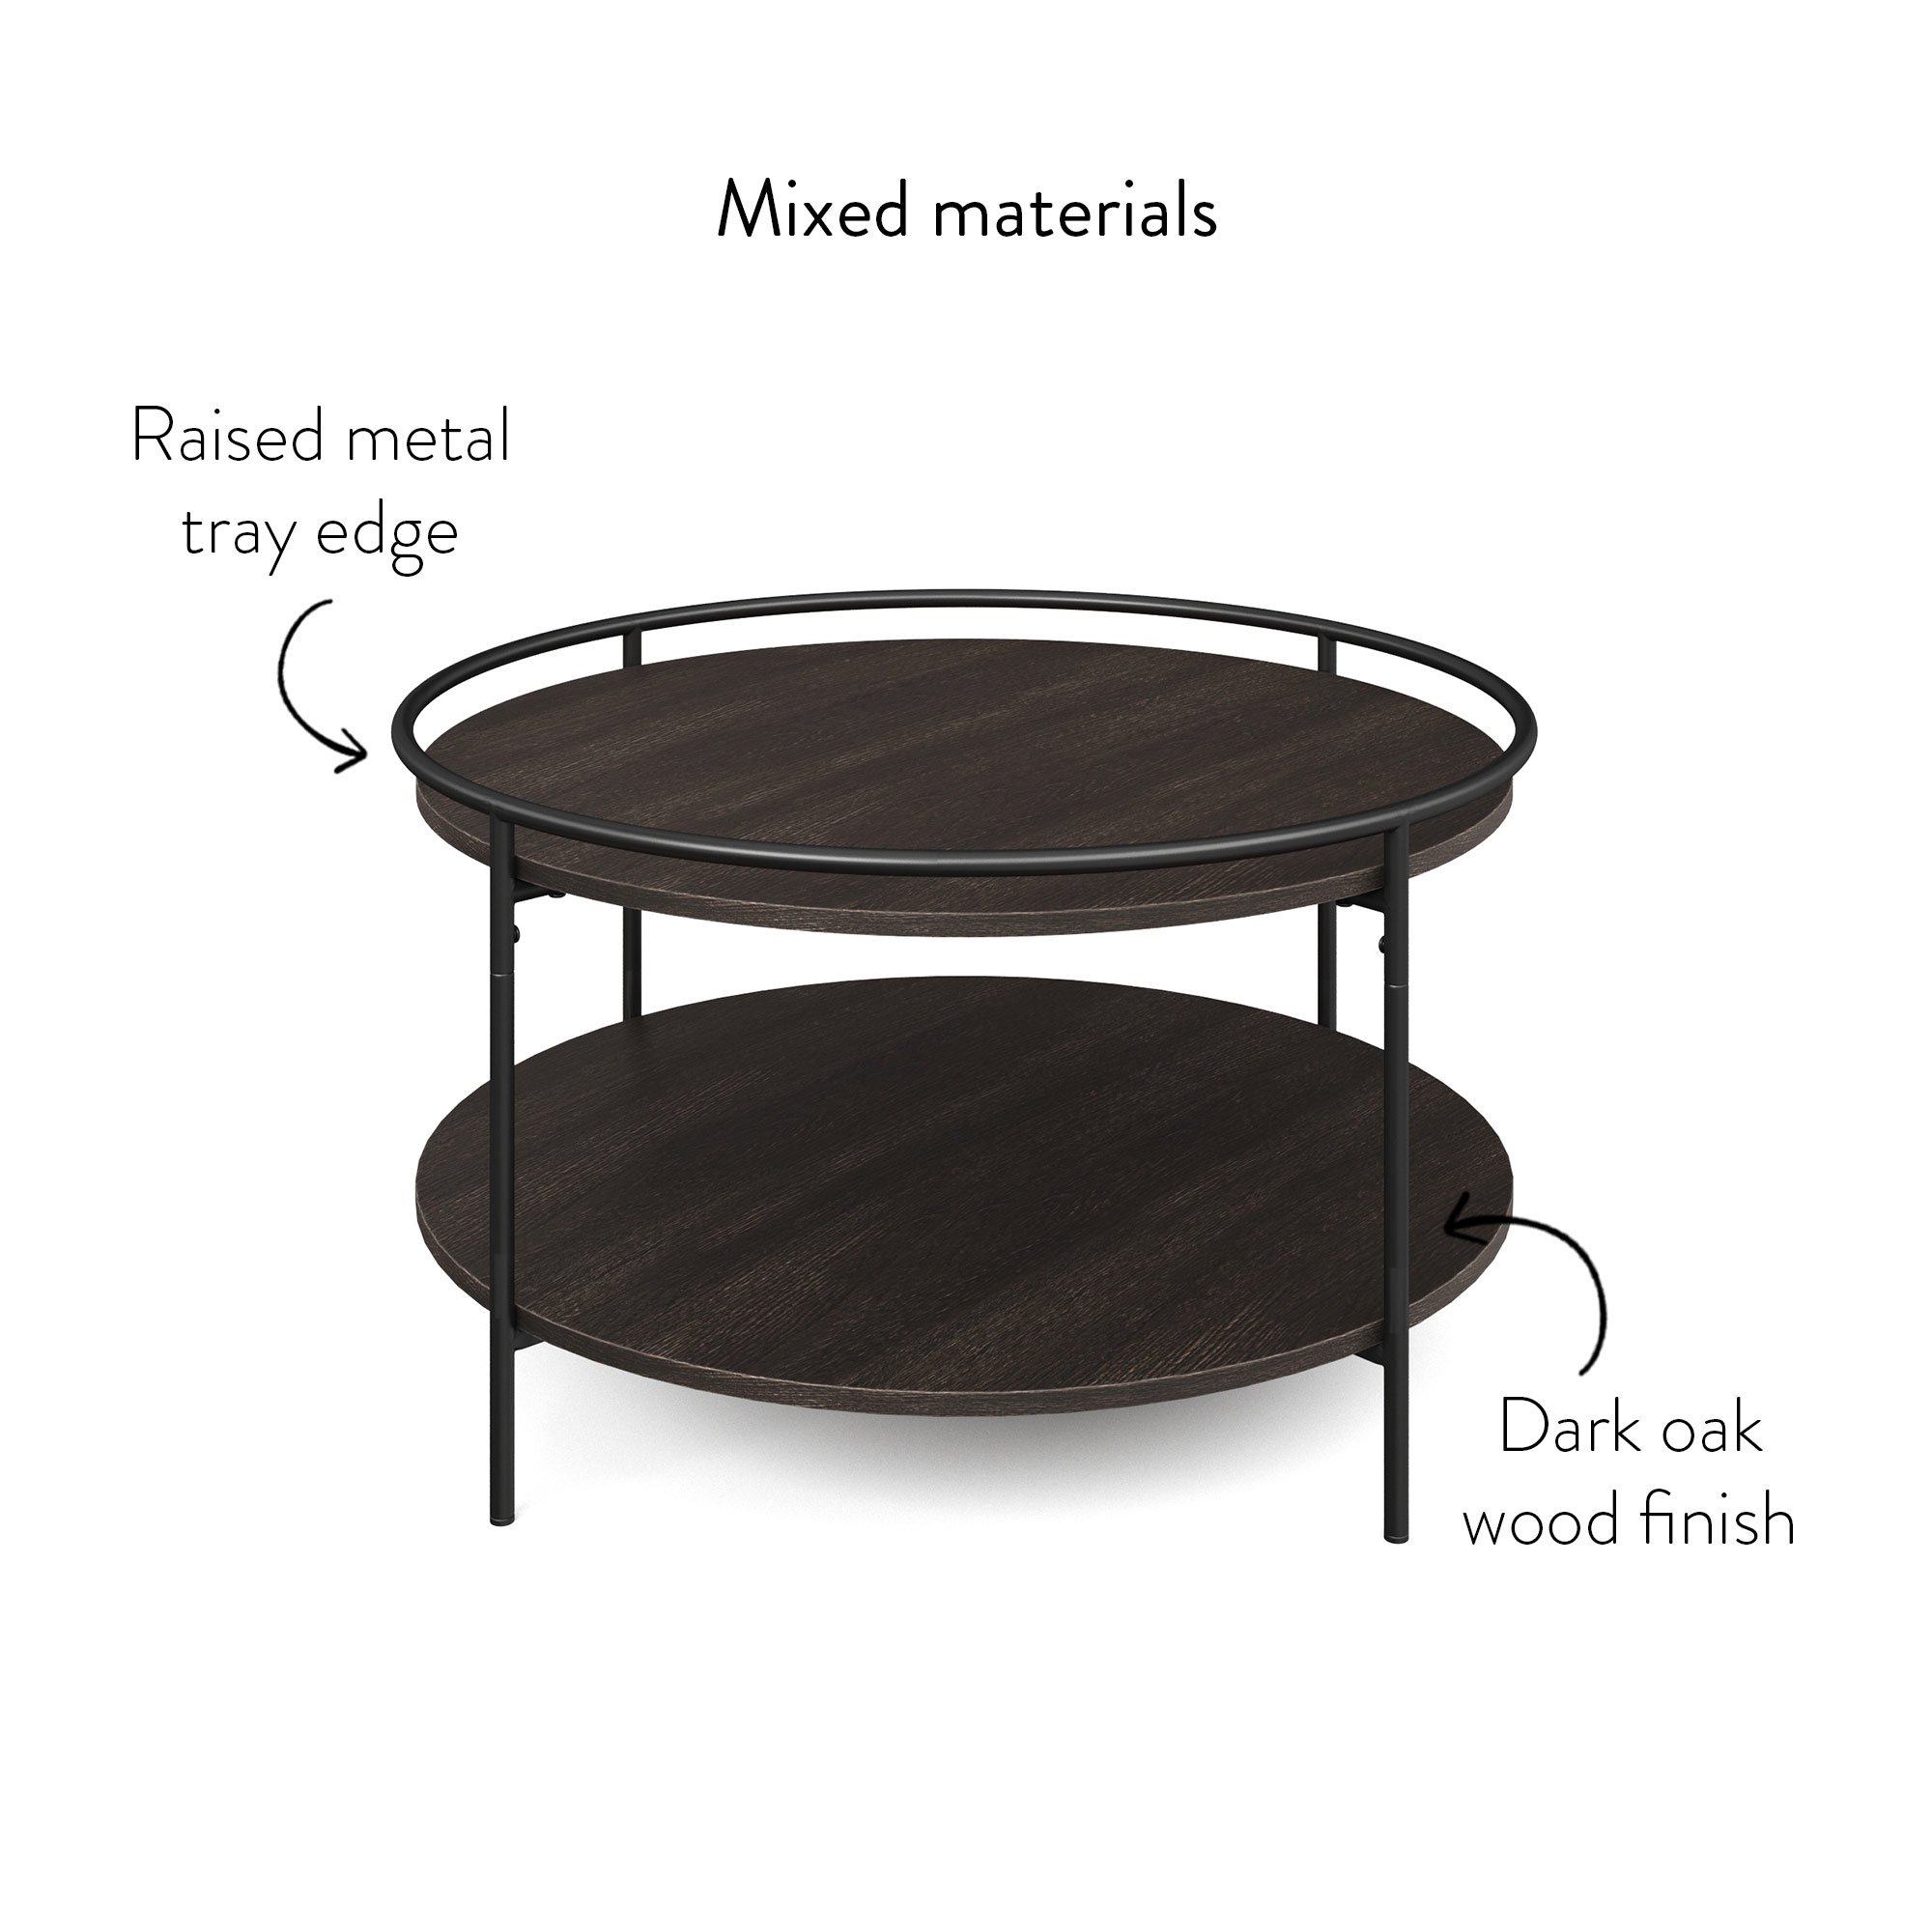 Nathan James Paloma Round Coffee Table for Tea or Cocktail 2-Tier Minimalist Tray Top Edge, Dark Oak/Matte Black - image 5 of 7